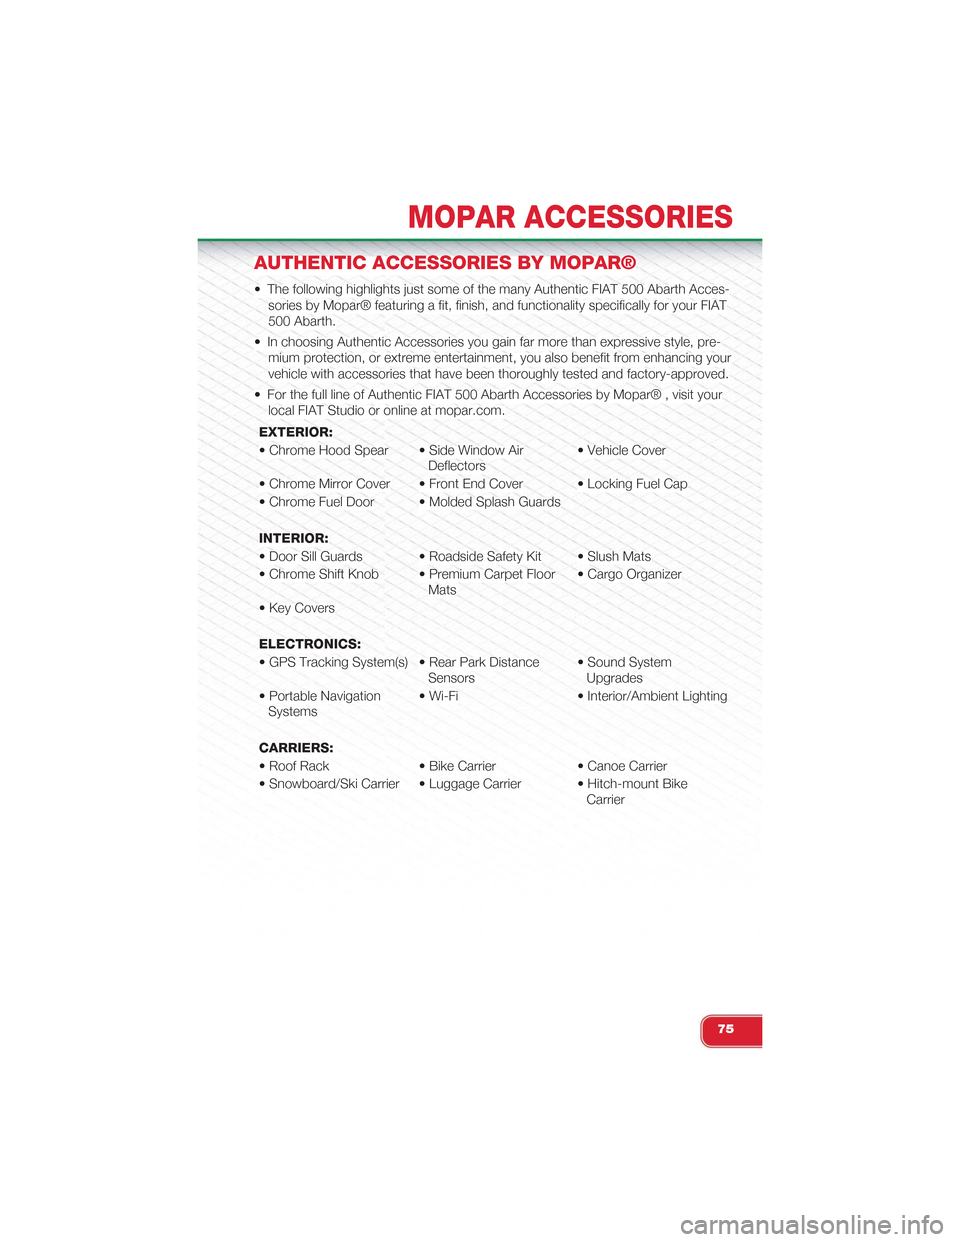 FIAT 500 ABARTH 2013 2.G User Guide AUTHENTIC ACCESSORIES BY MOPAR®
• The following highlights just some of the many Authentic FIAT 500 Abarth Acces-
sories by Mopar® featuring a fit, finish, and functionality specifically for your 